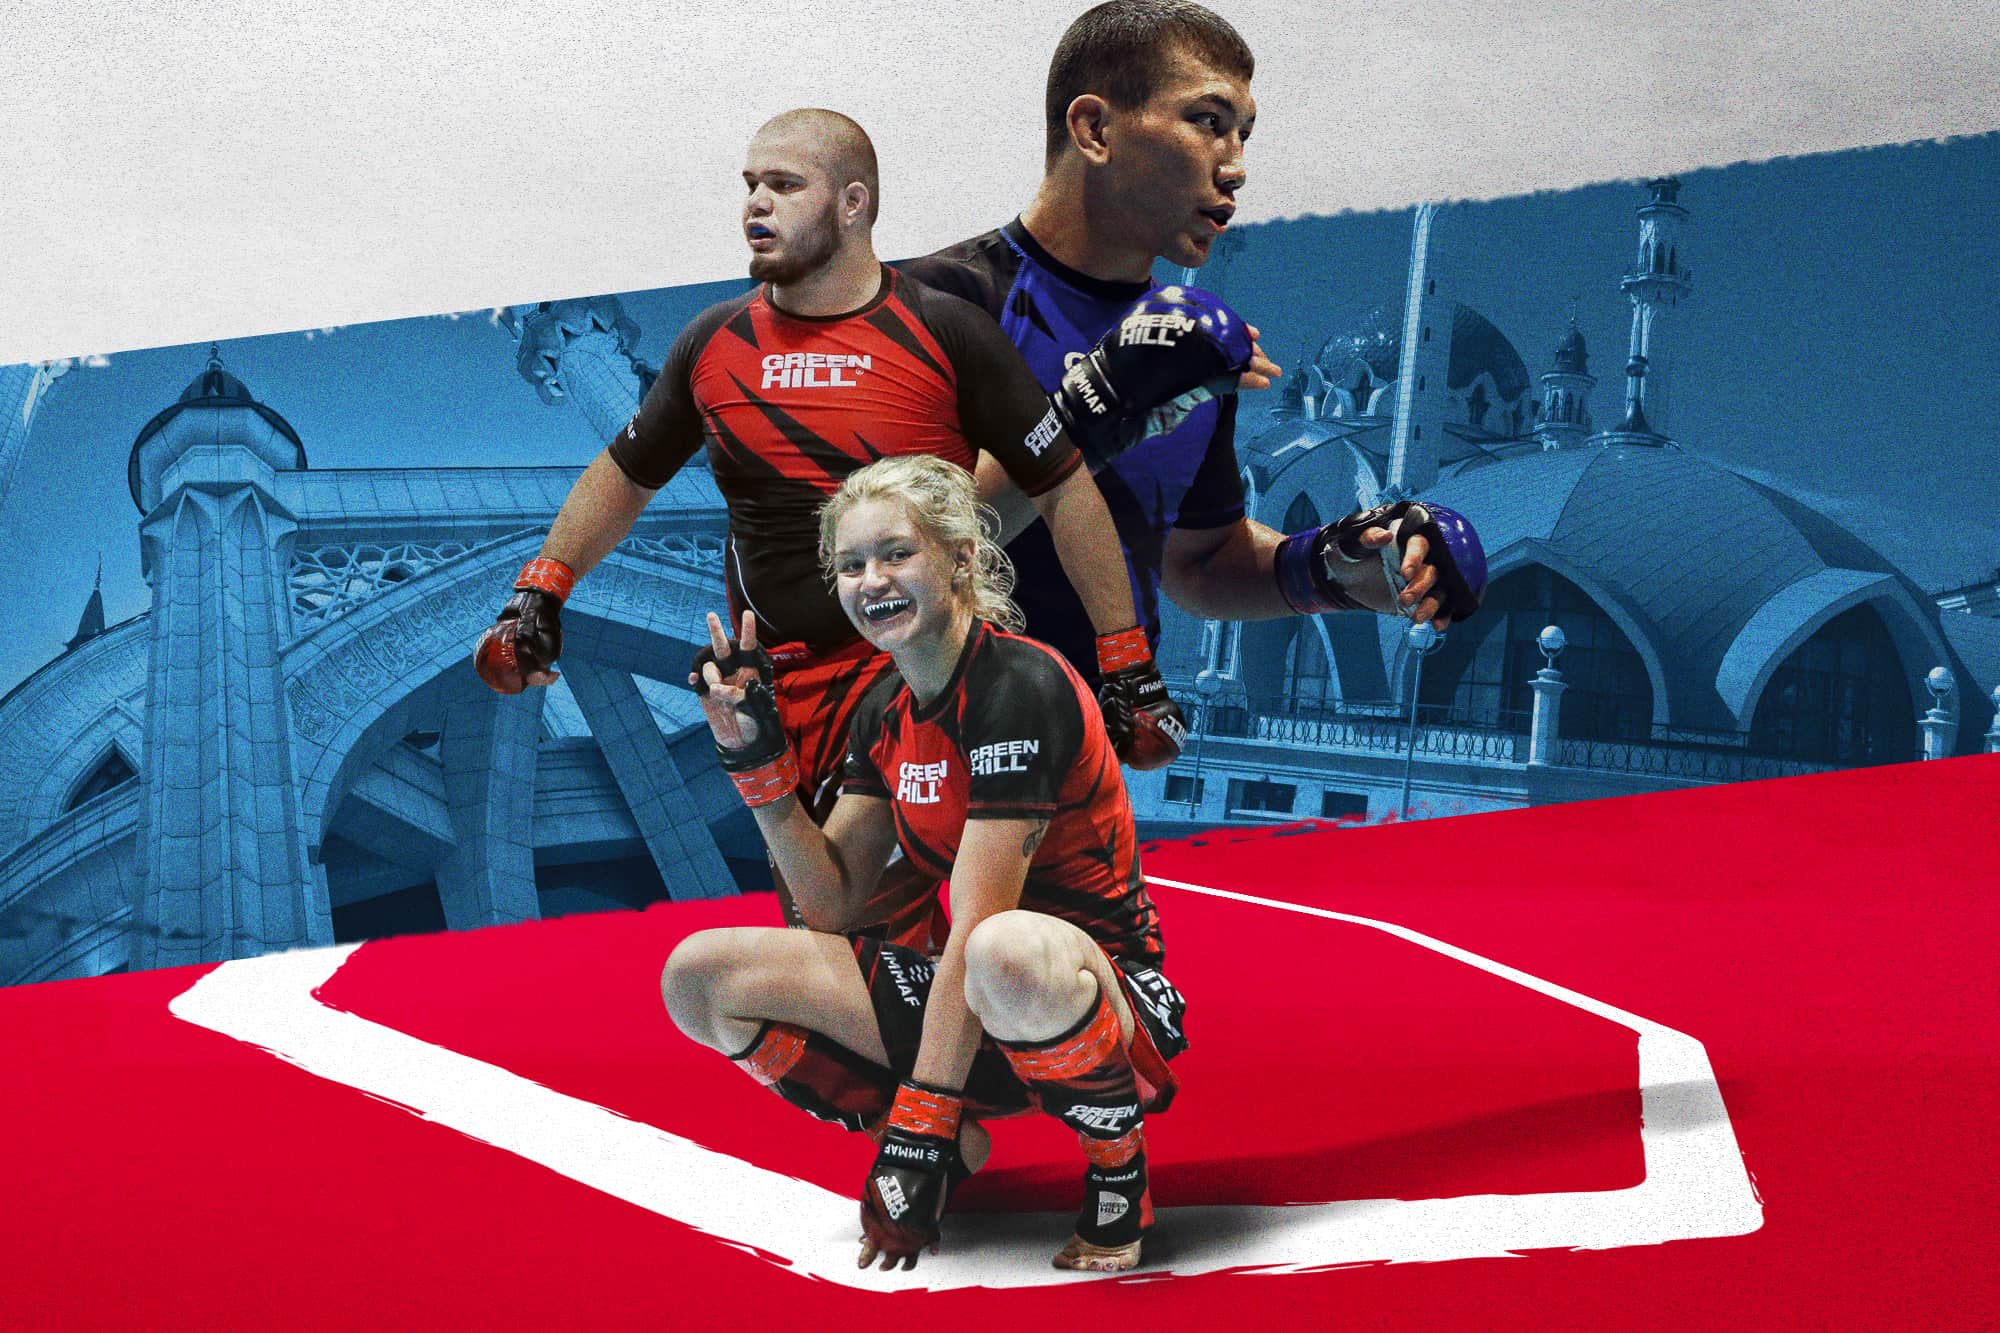 Watch the European MMA Championships live at IMMAF.TV